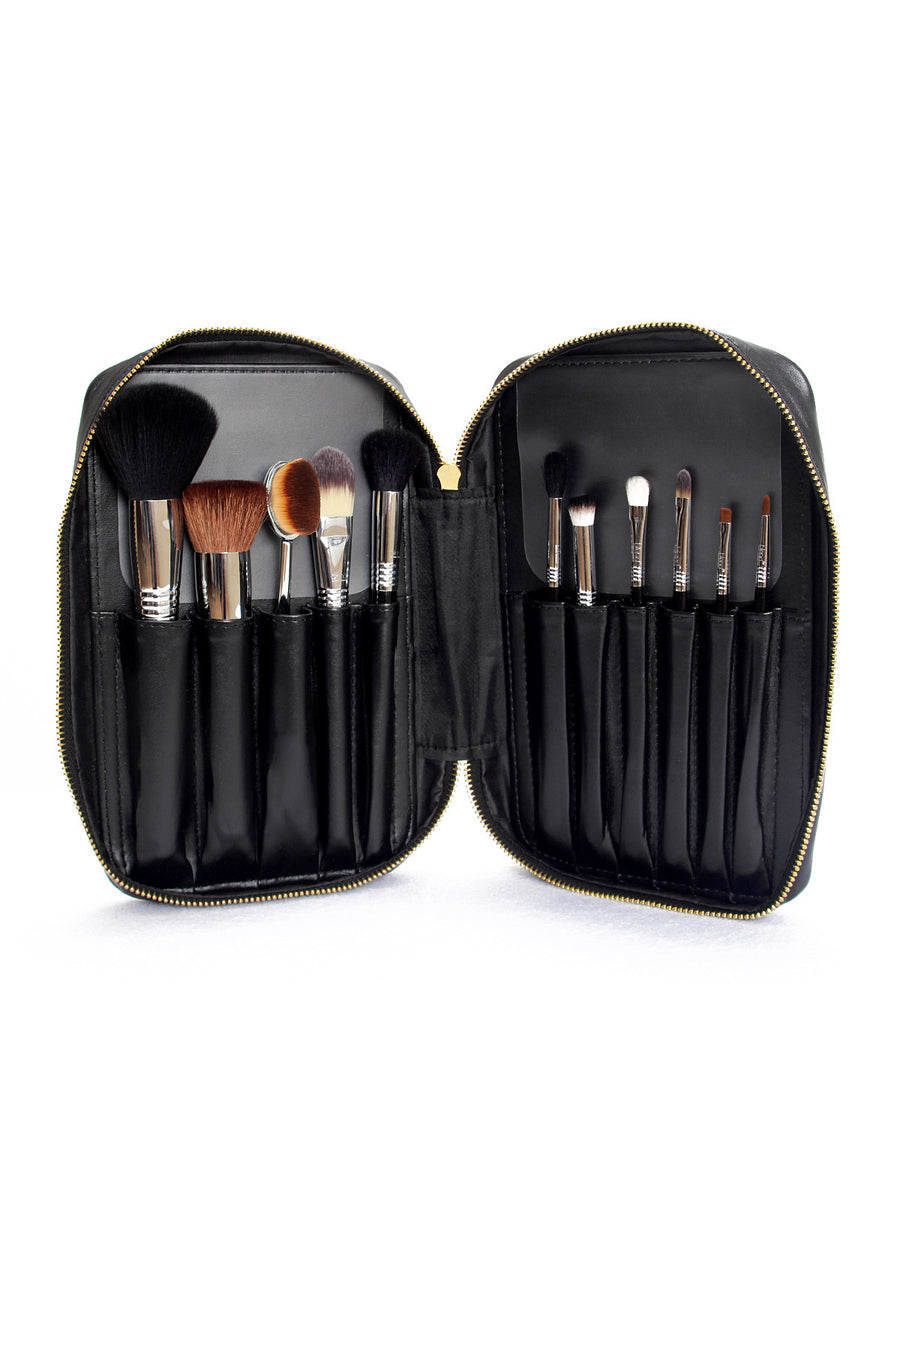 BRUSHES – Blend Mineral Cosmetics